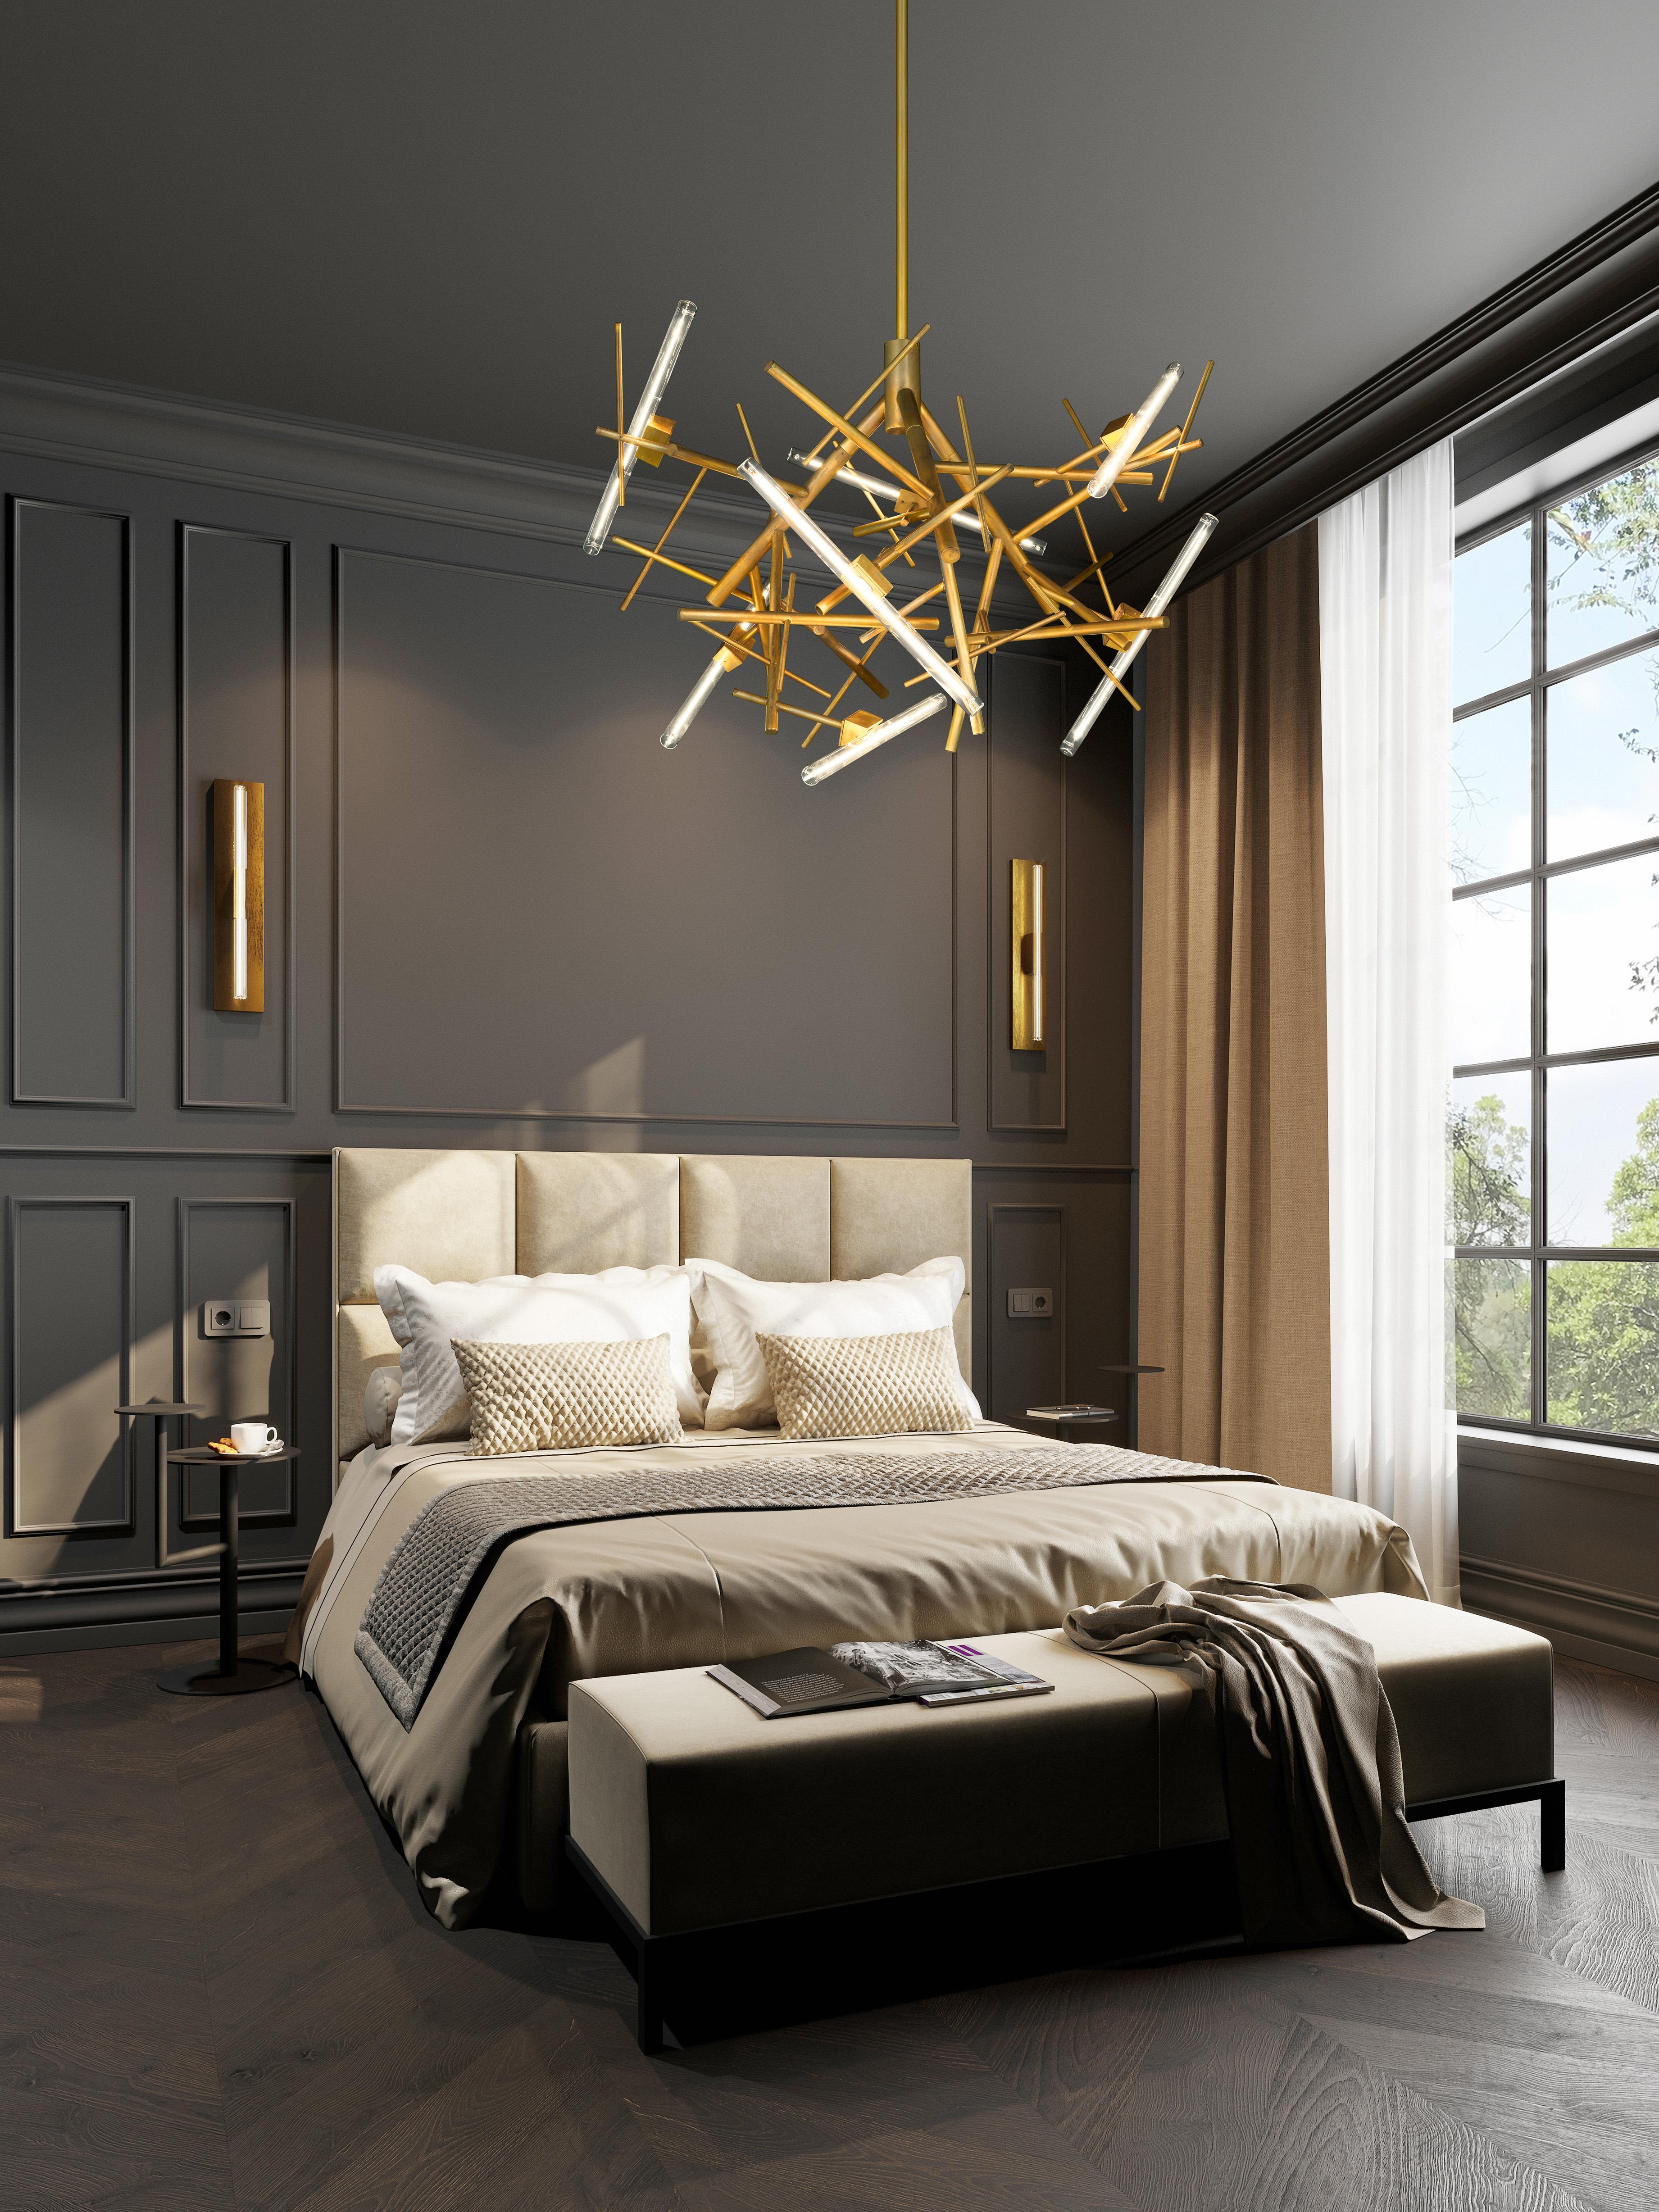 Hand-Crafted Modern Chandelier in a Nickel Finish, Linea Collection, by Brand van Egmond